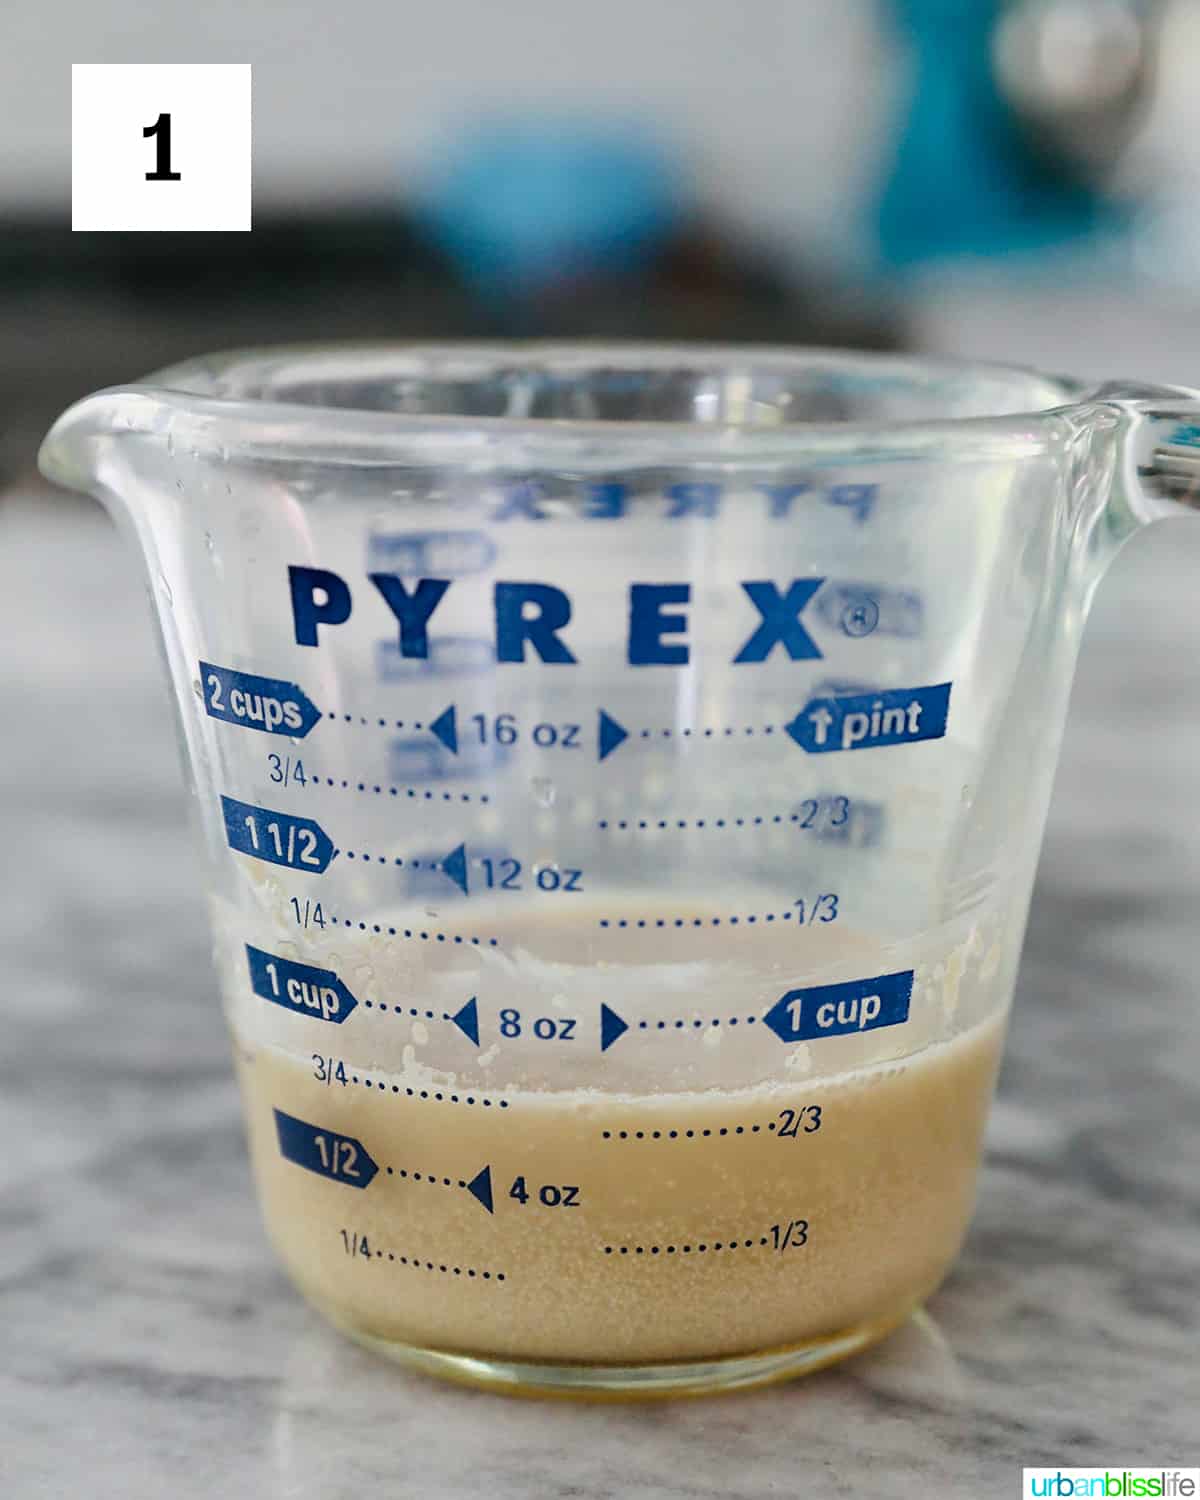 glass Pyrex measuring cup with yeast rising on a marble countertop.